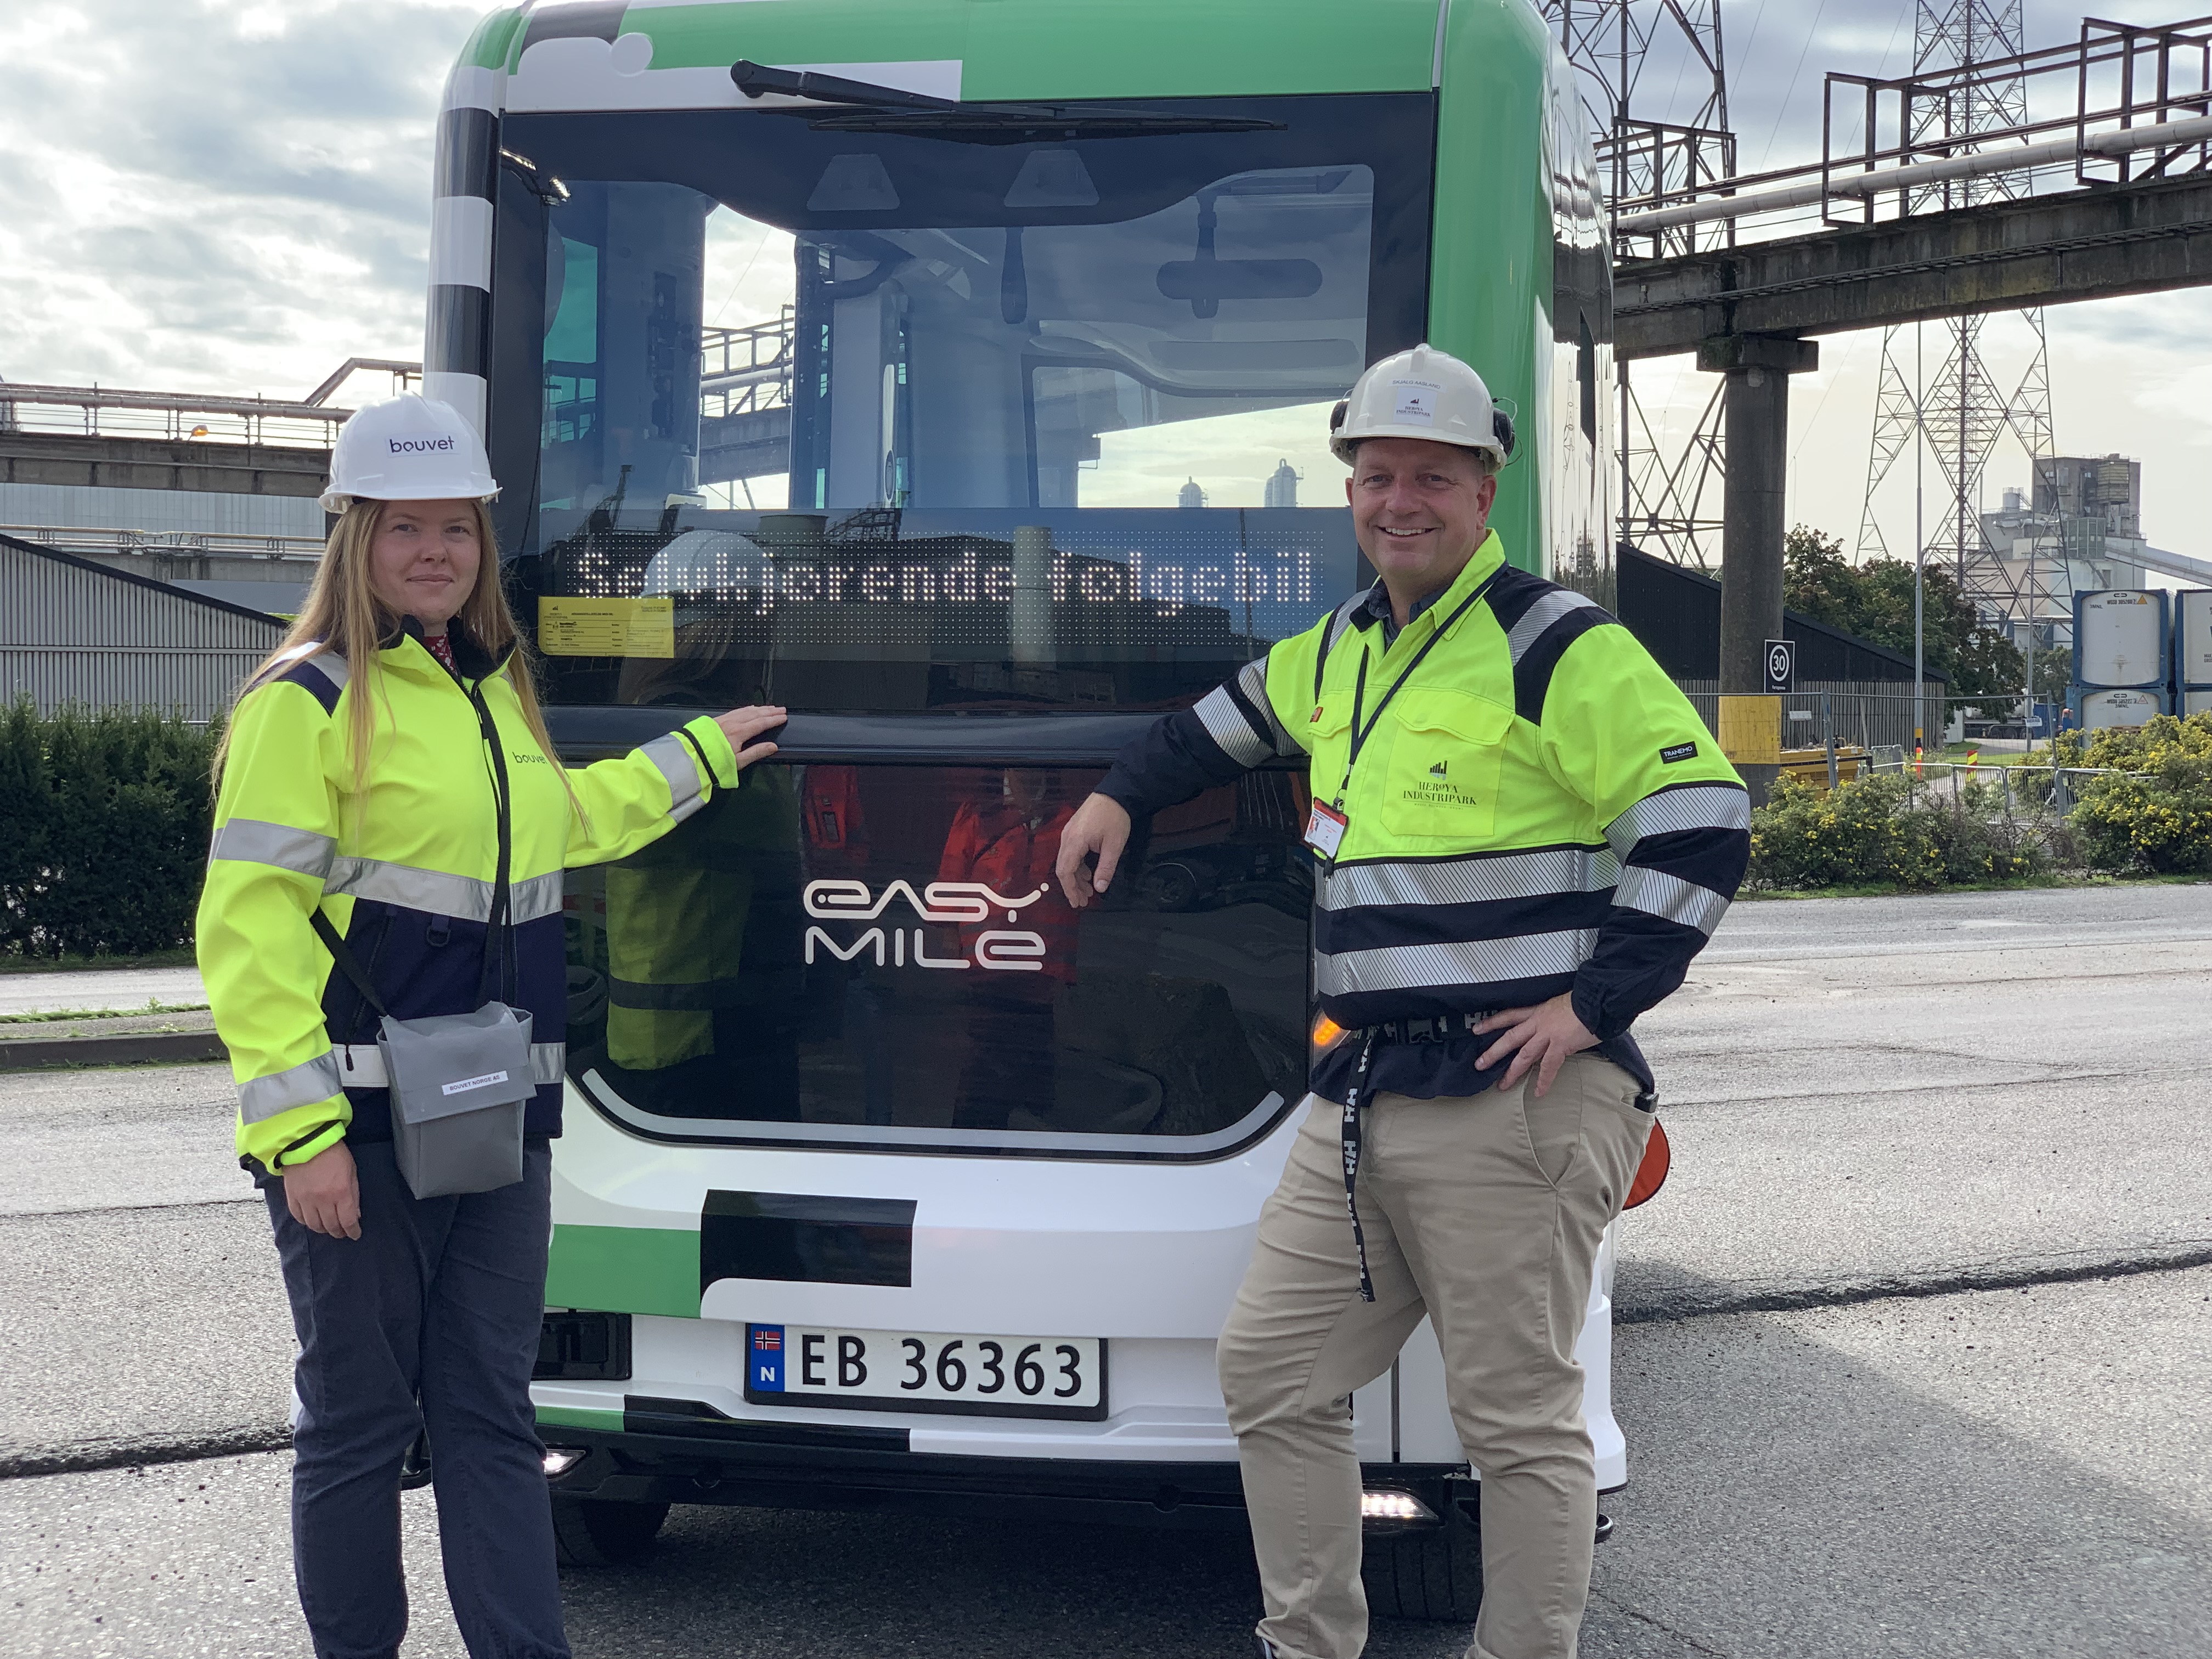 two persons posing in front of an autonomous white mini bus, located outside and in an industrial environment.